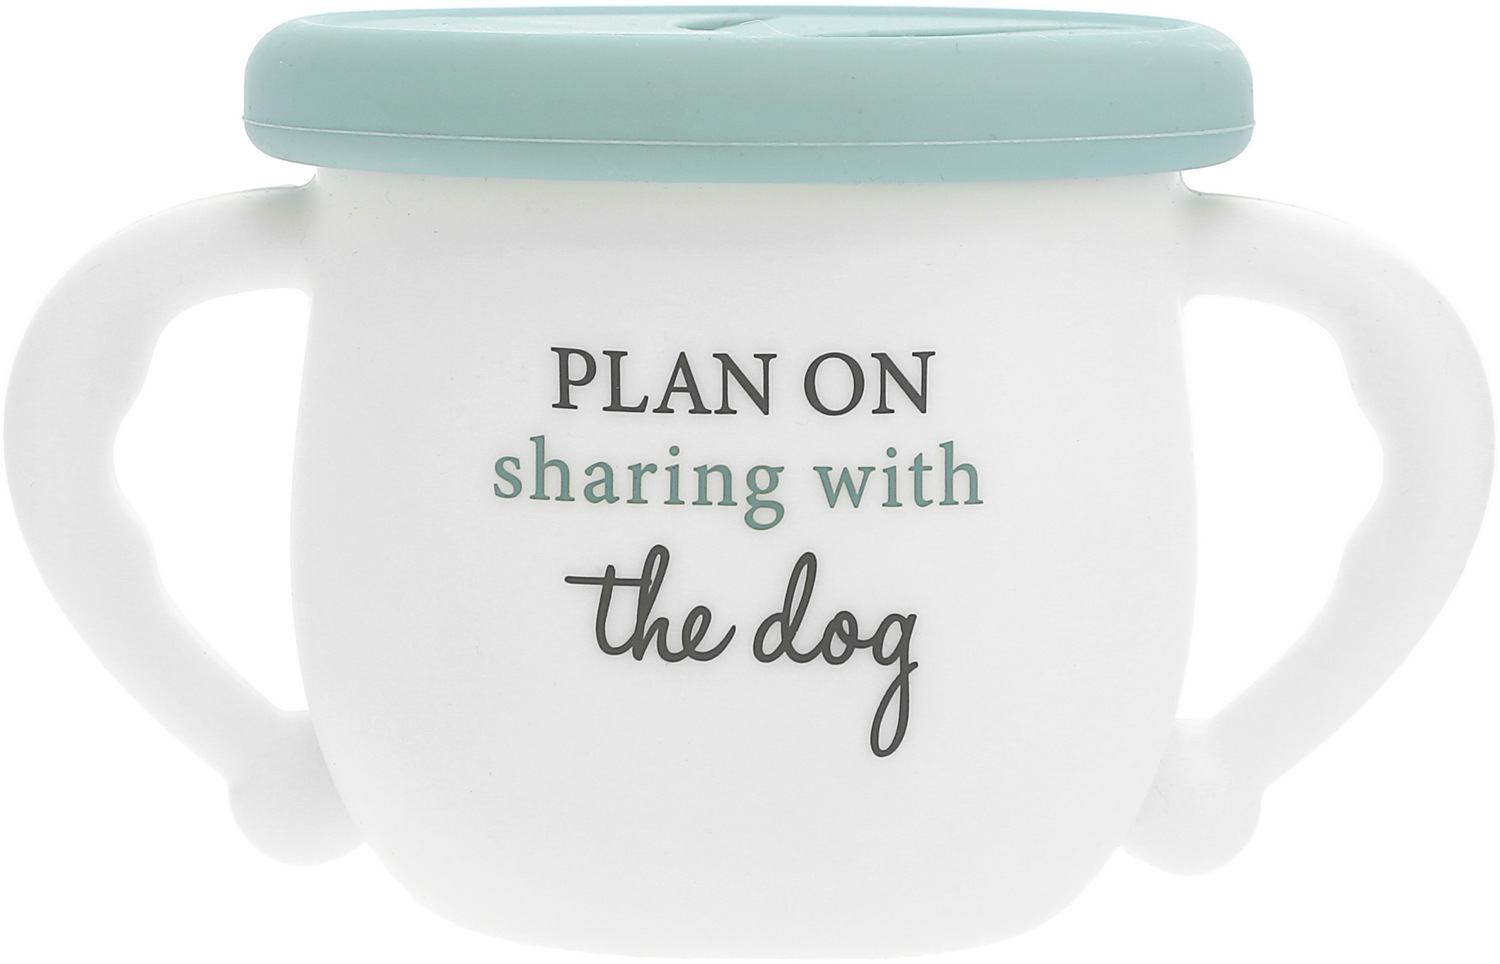 The Dog by A-Parent-ly - The Dog - 3.5" Silicone Snack Bowl with Lid